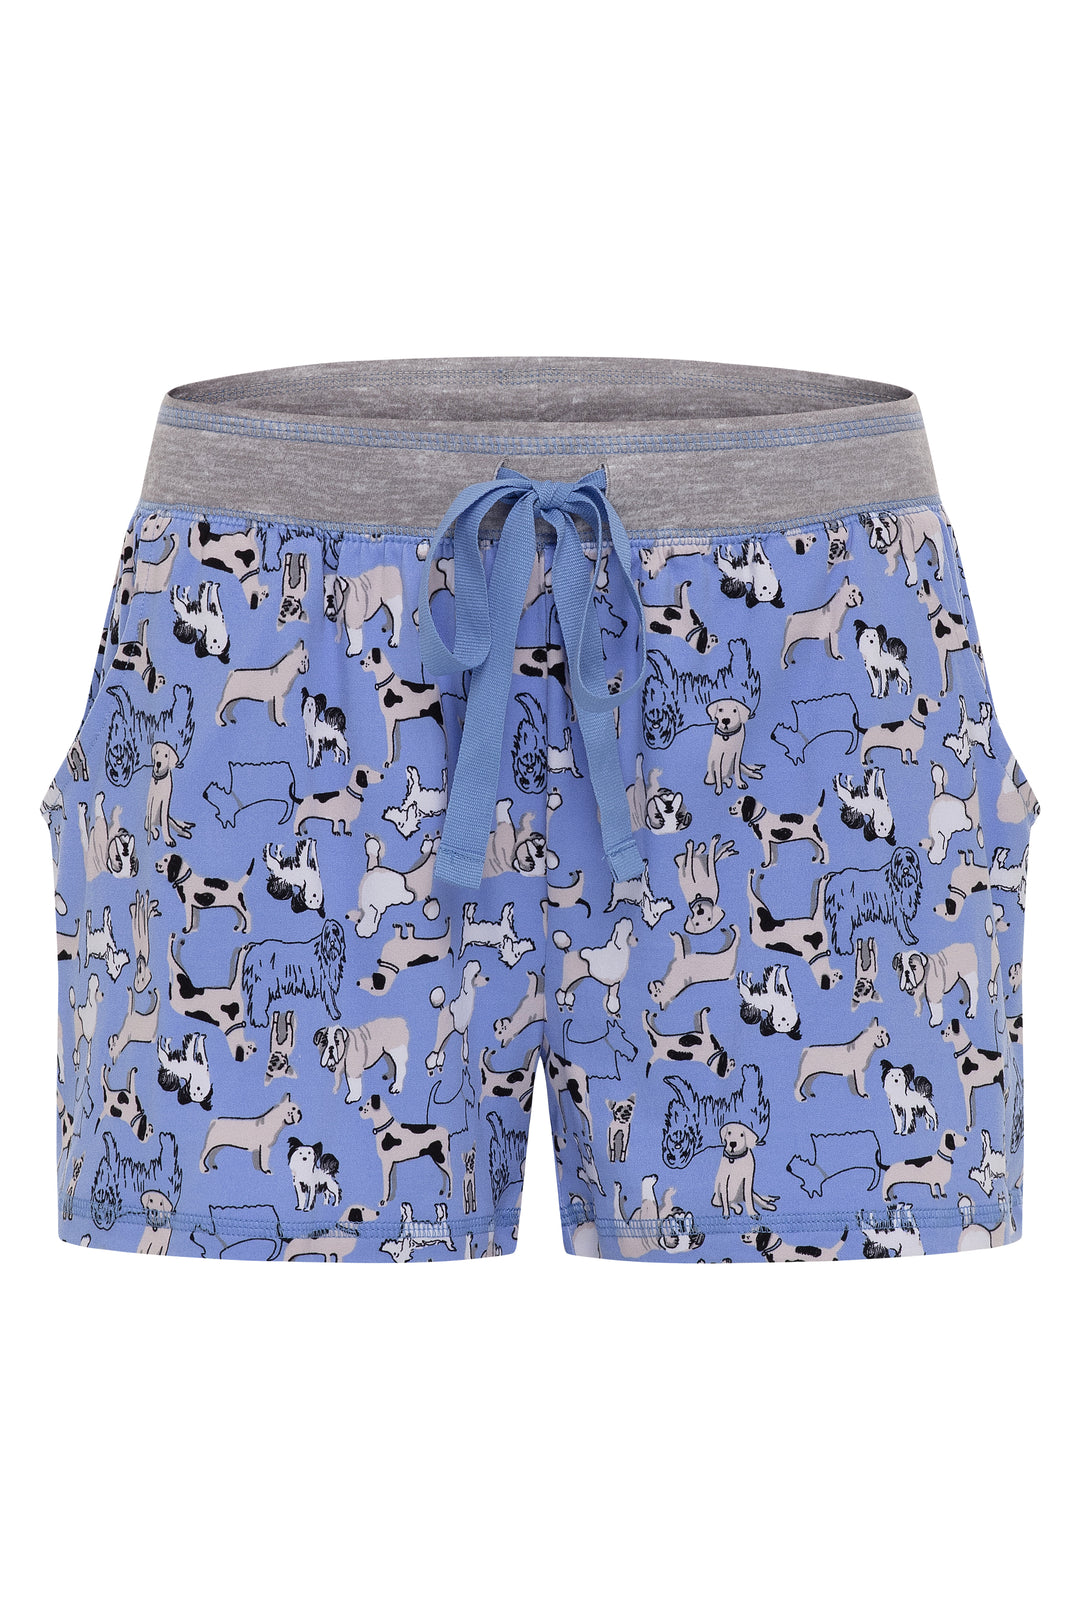 Animal patterned blue shorts as part of the René Rofé 2 Pack Lightweight Shirt Set in Blue Stars pattern